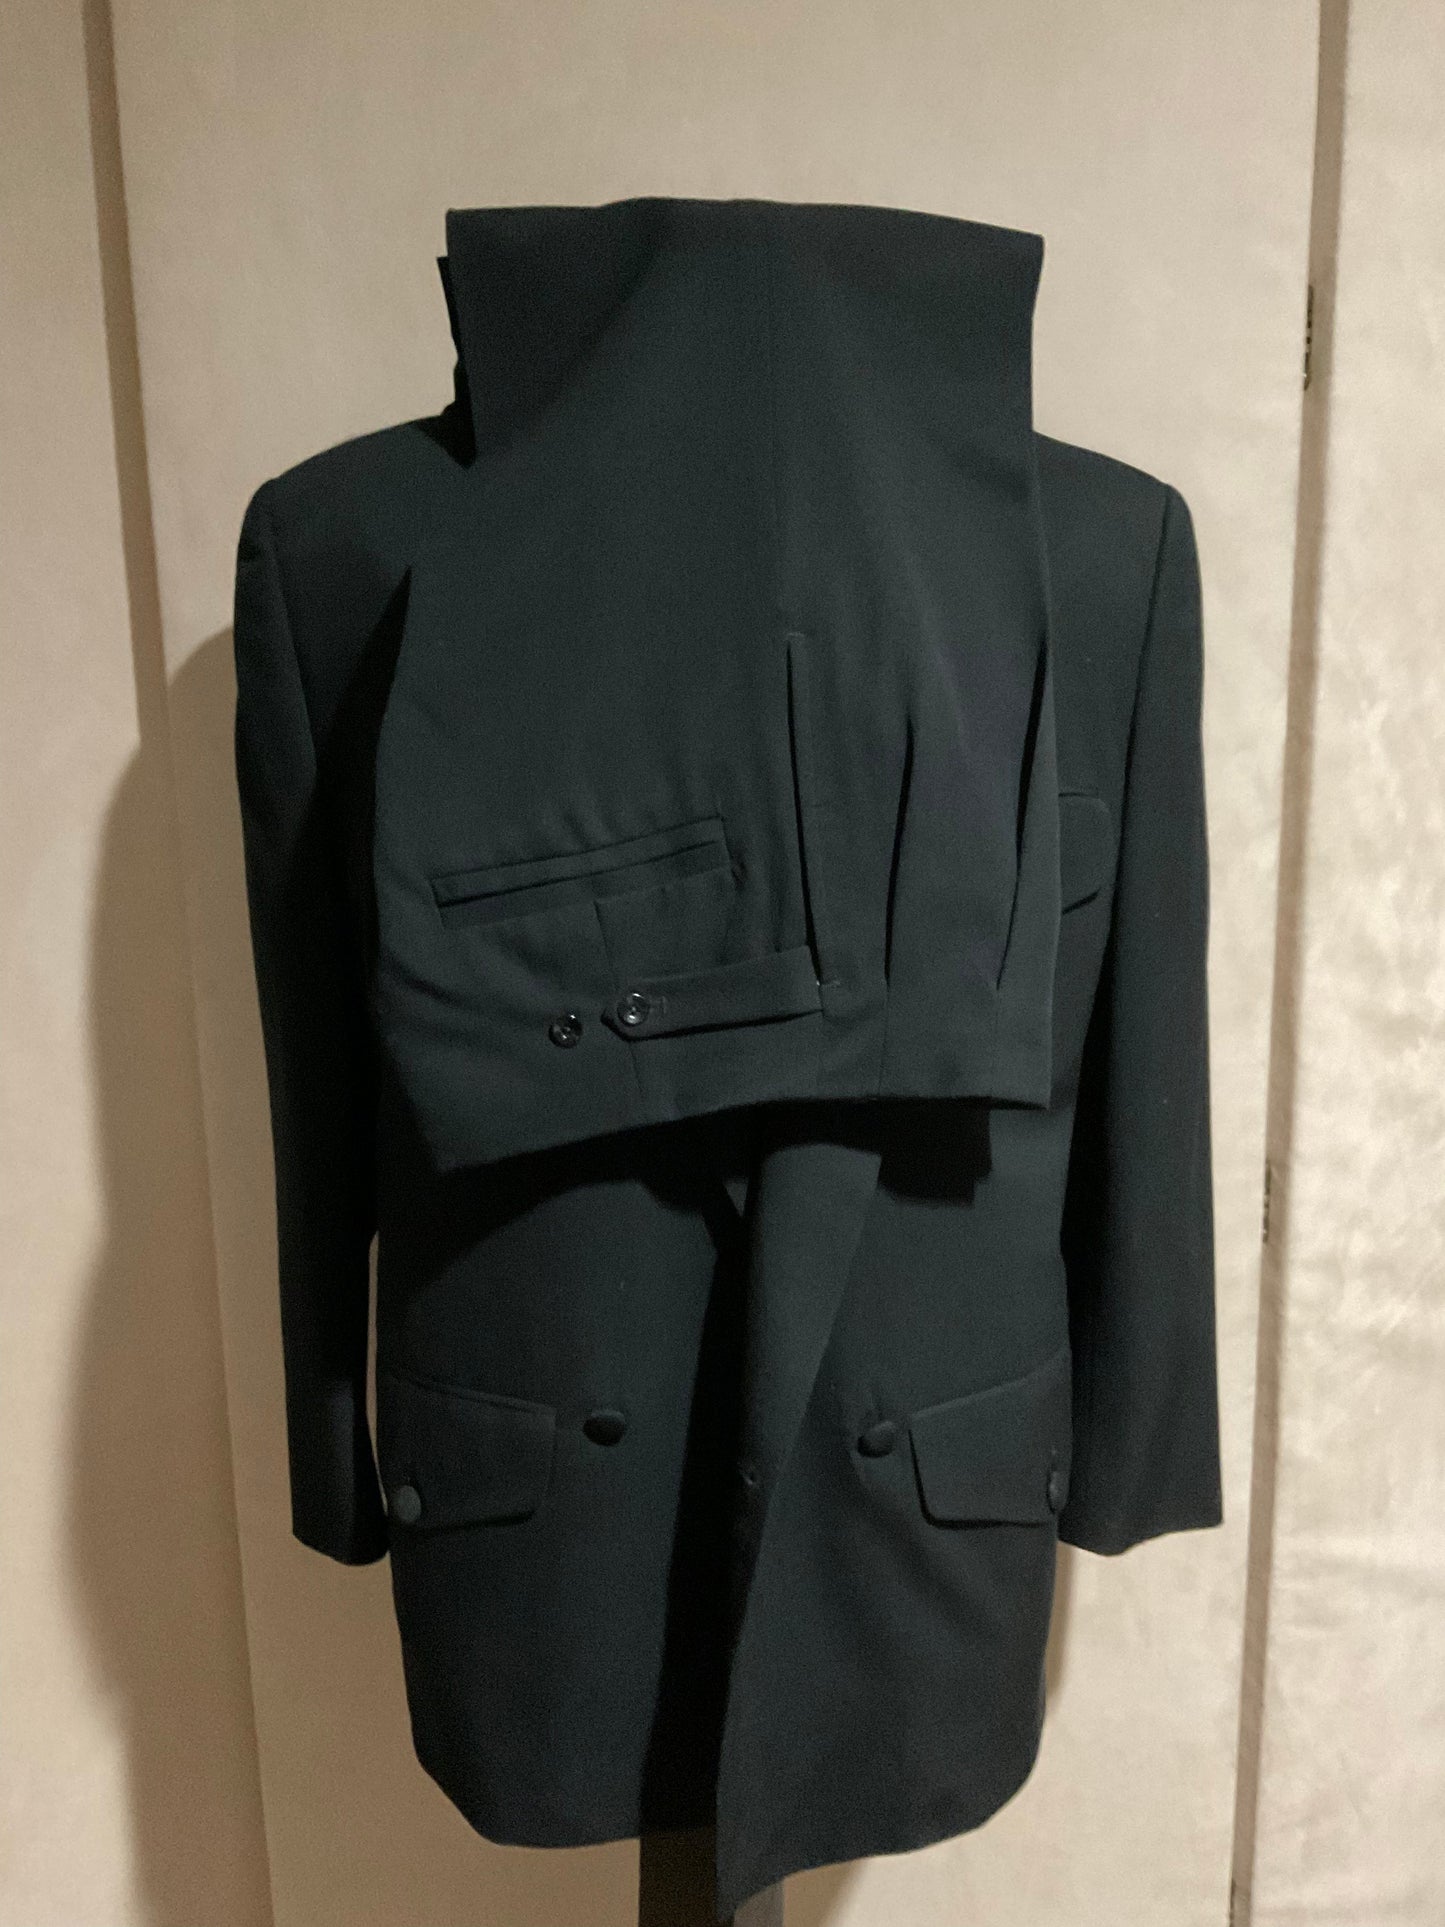 R P SUIT / CUSTOM BESPOKE DESIGN / DOUBLE BREASTED 4 POCKETS / BLACK / 40  REG / CRAFTED IN USA